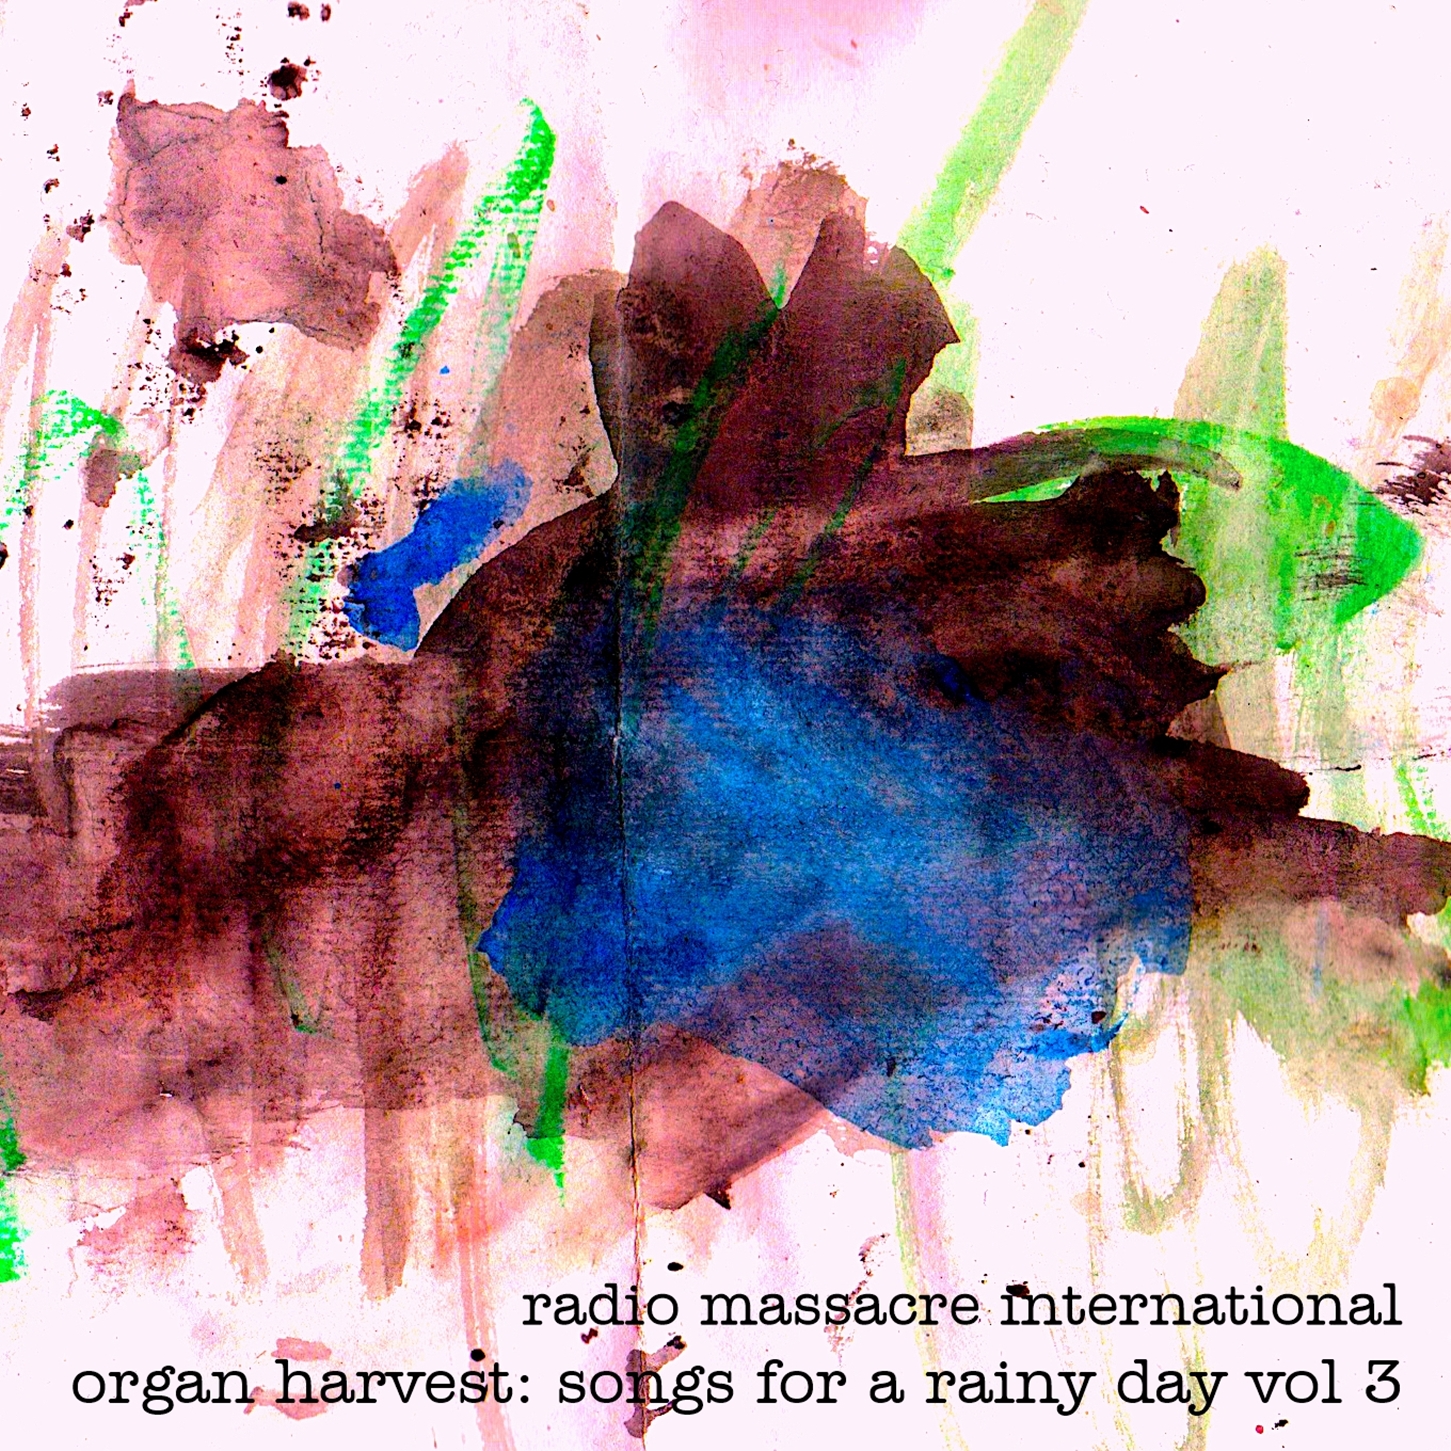 organ harvest: songs for a rainy day vol 3